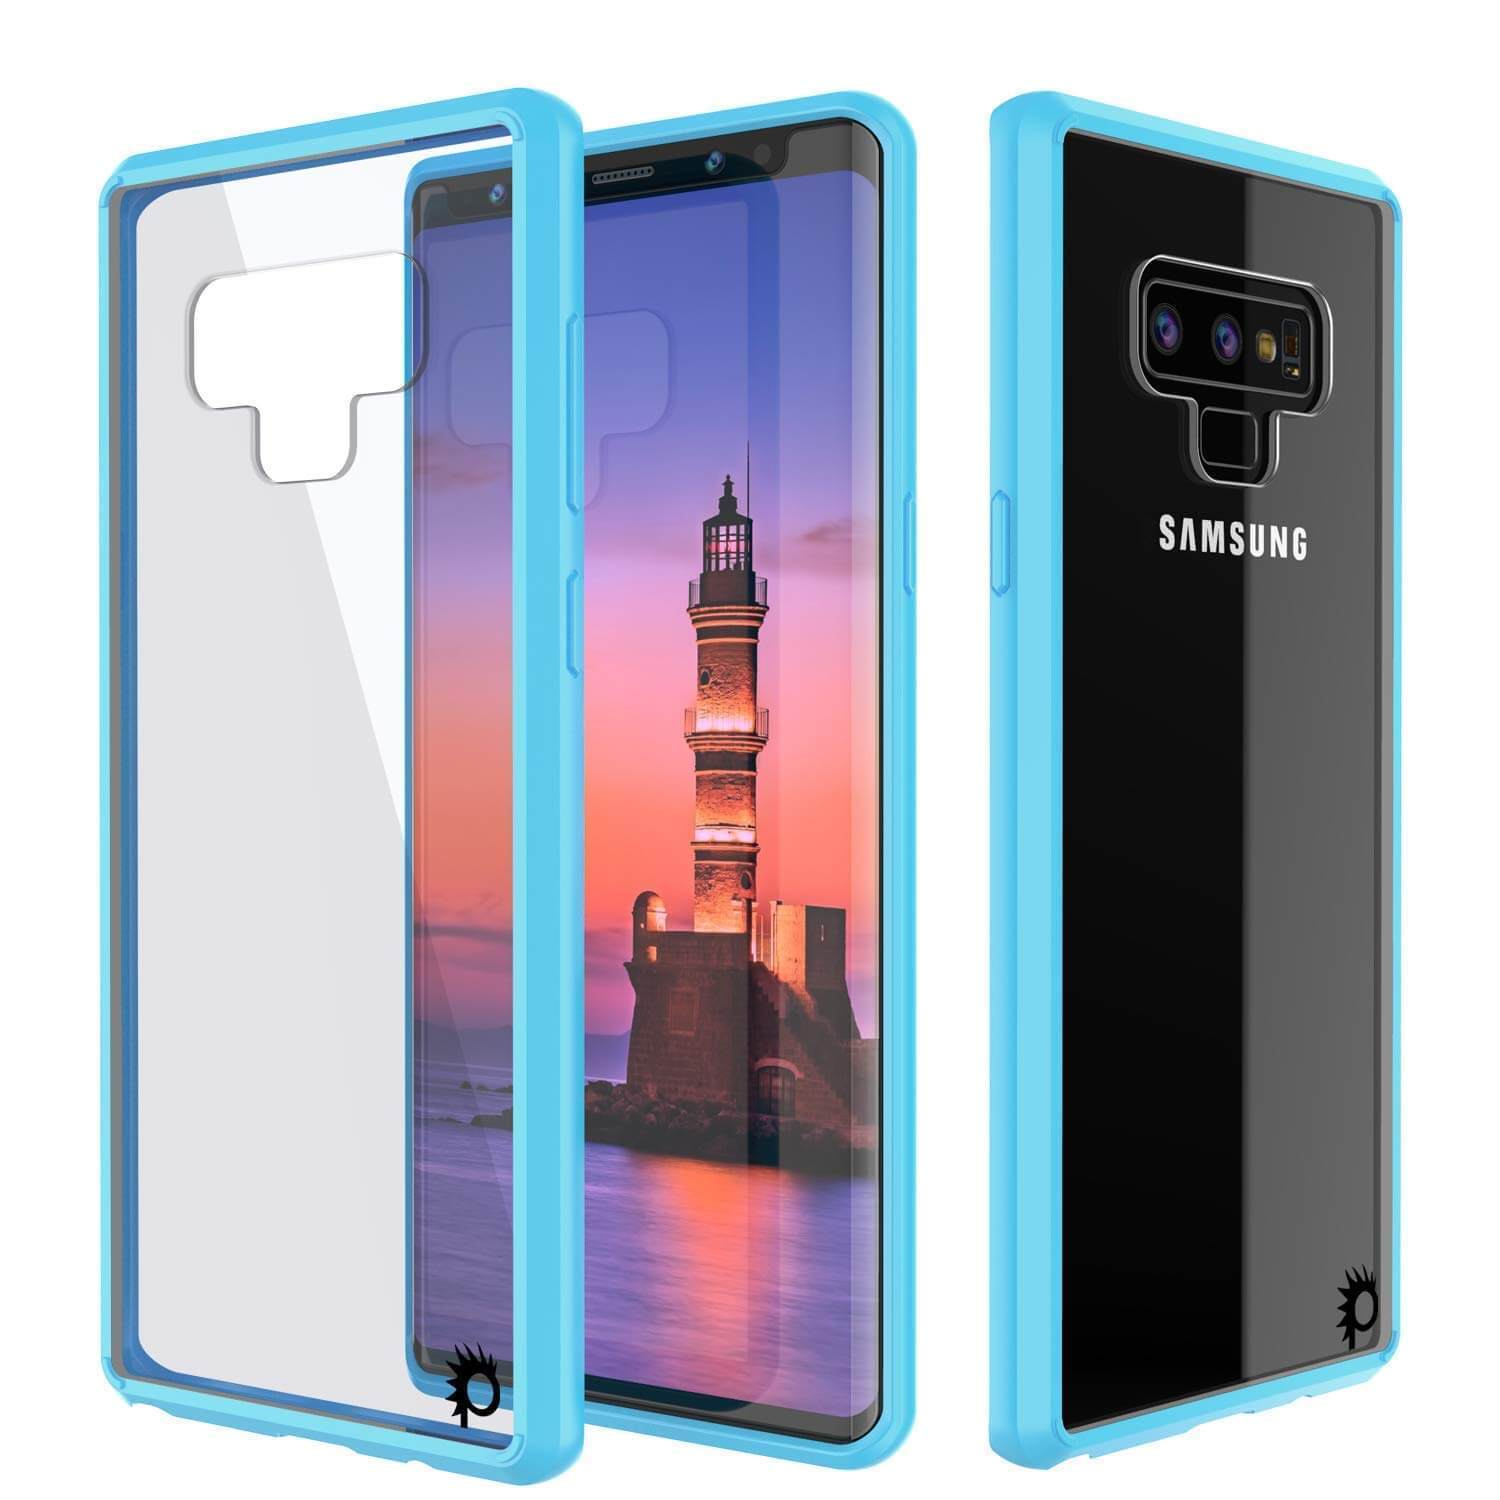 Galaxy Note 10+ Plus Punkcase Lucid-2.0 Series Slim Fit Armor Light Blue Case Cover